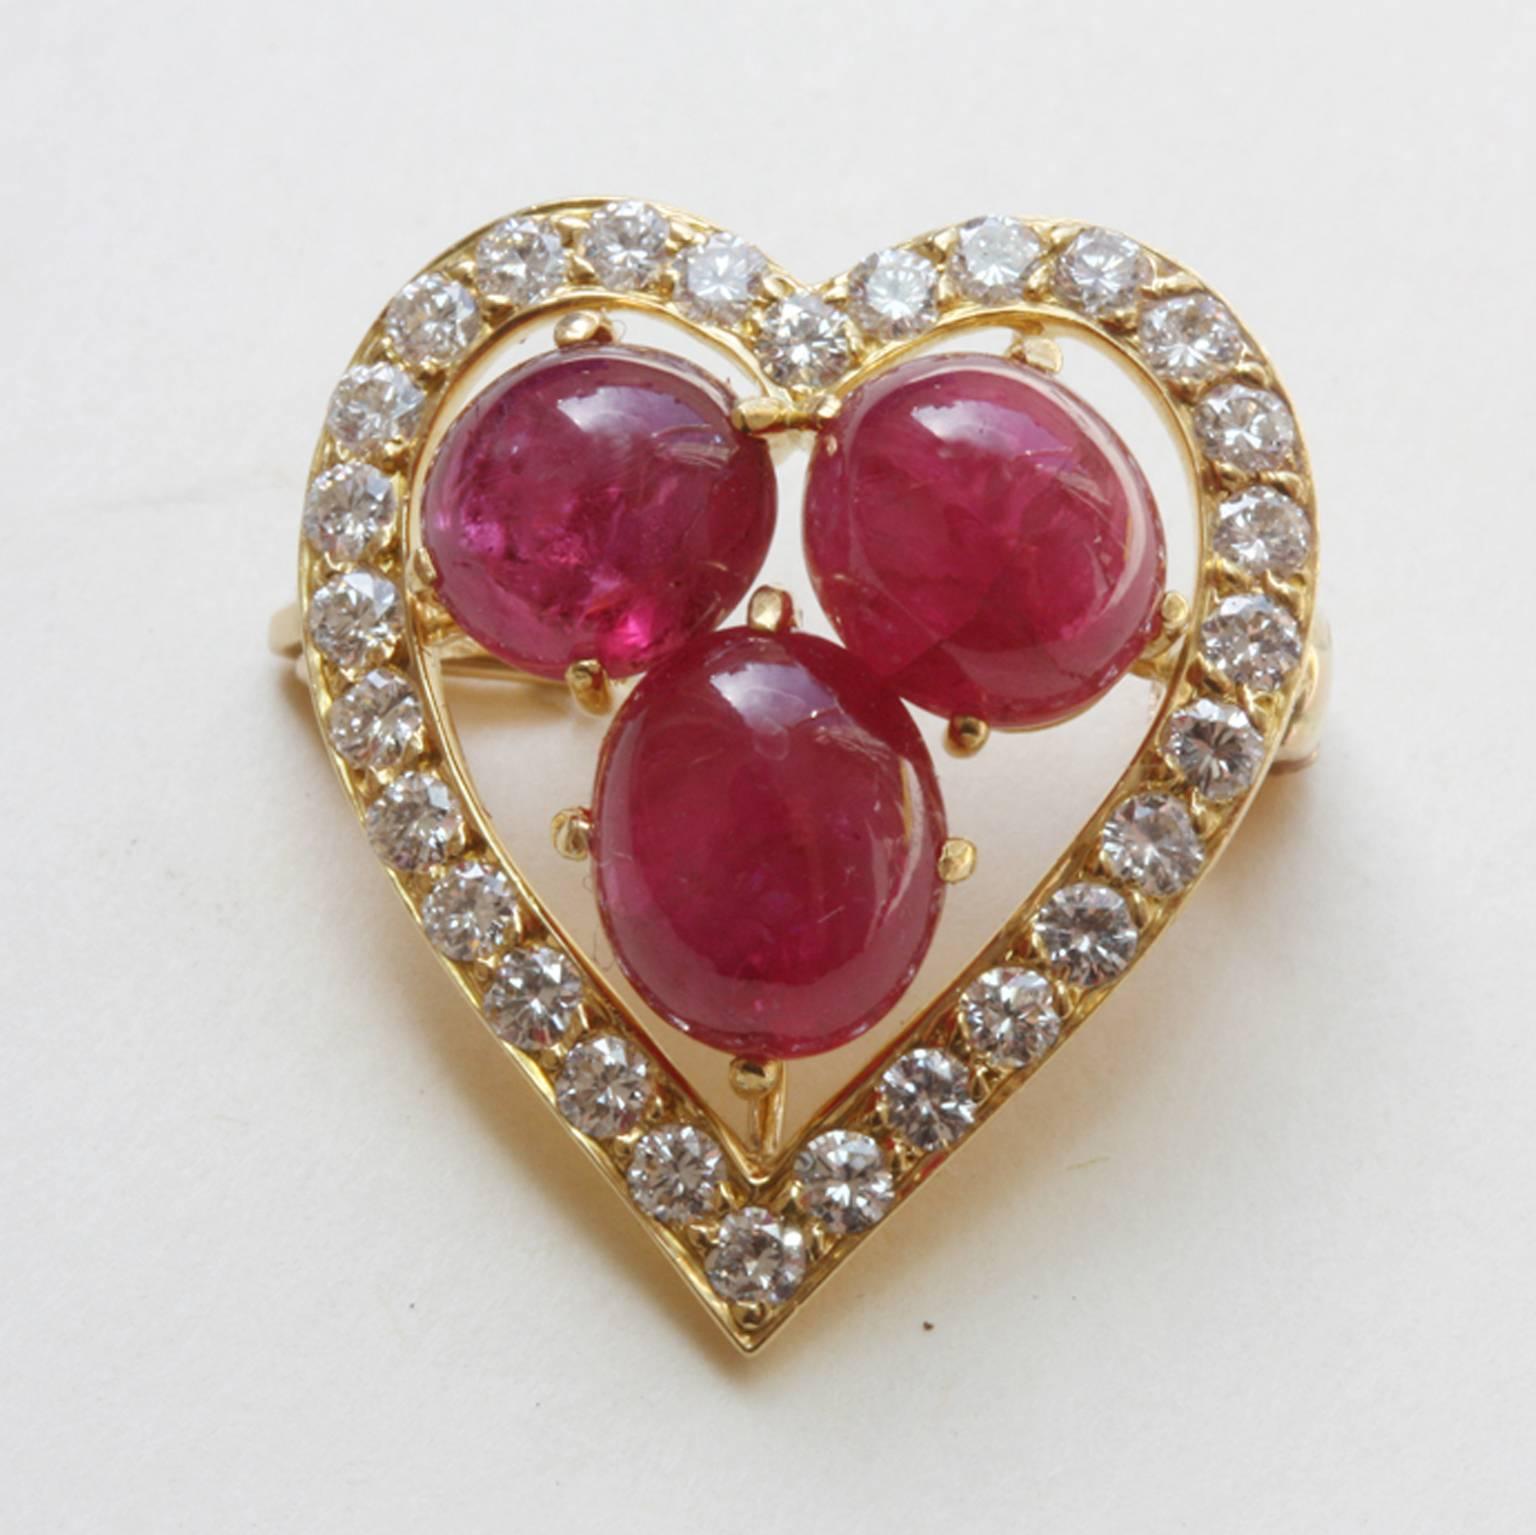 A sweet little 18 carat gold brooch in the shape of a heart, set with 28 brilliant cut diamonds (app. 0.56 in total, VS2, G-H) in the center three cabochon cut natural rubies (7 x 6 mm), signed and numbered: Cartier, Q4269.

weight: 4.3